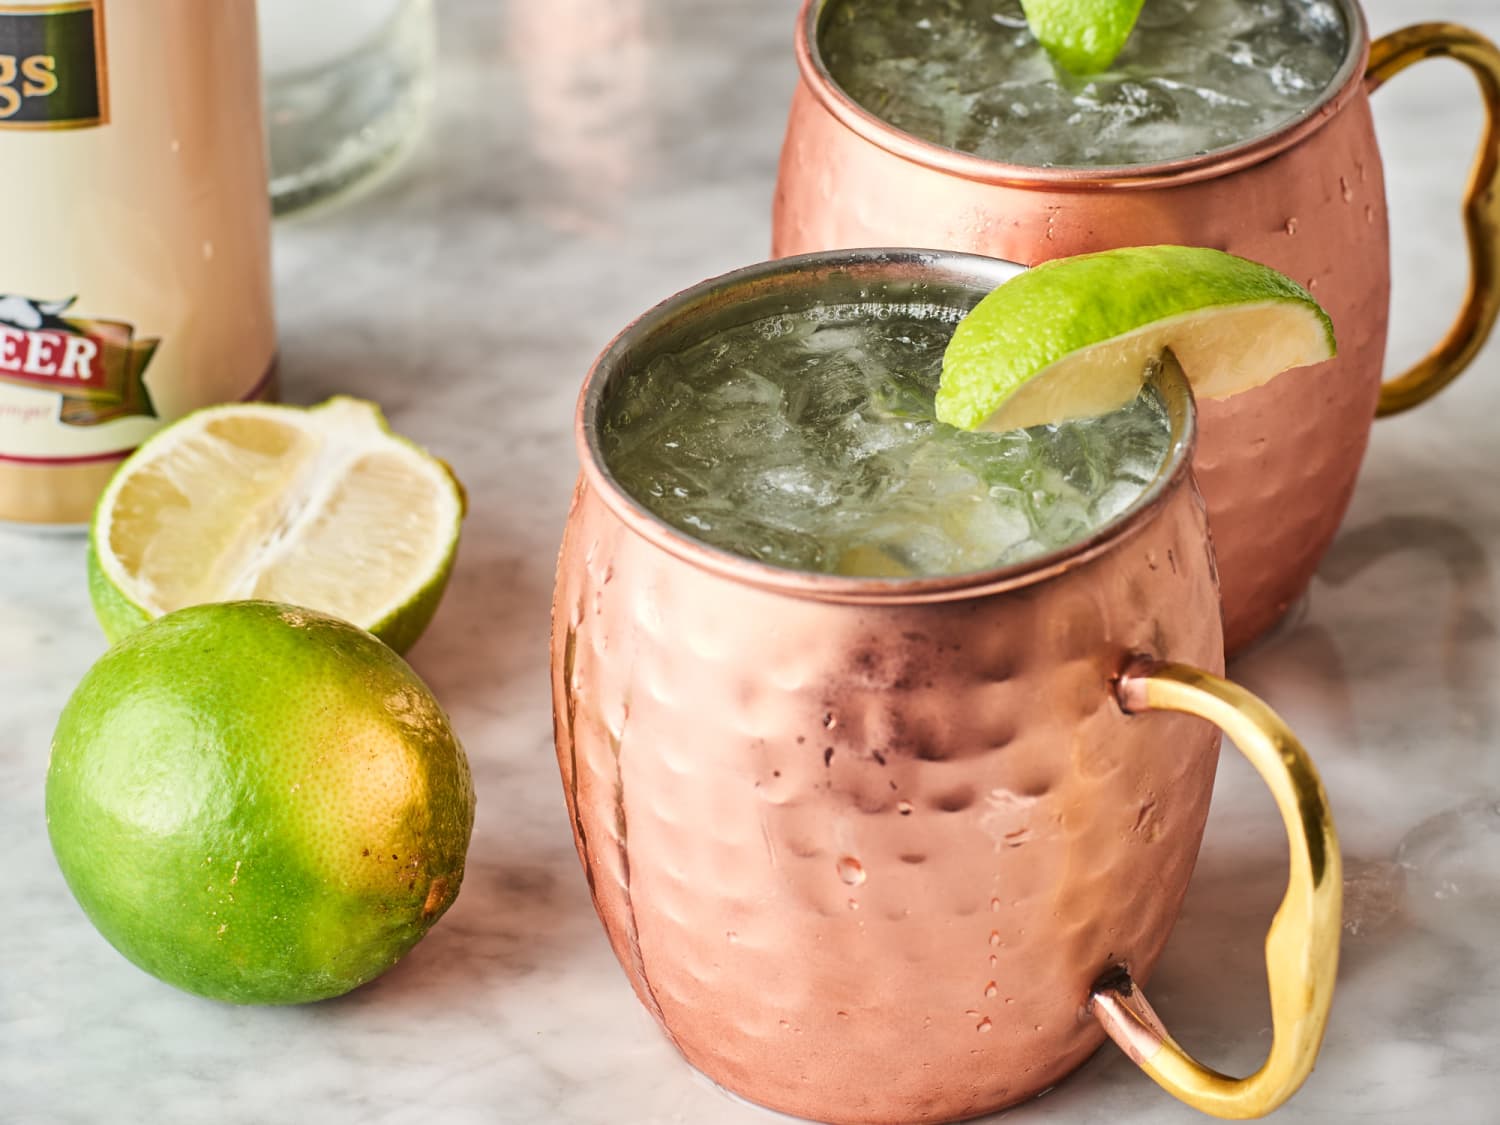 How to Make the Best Moscow Mules